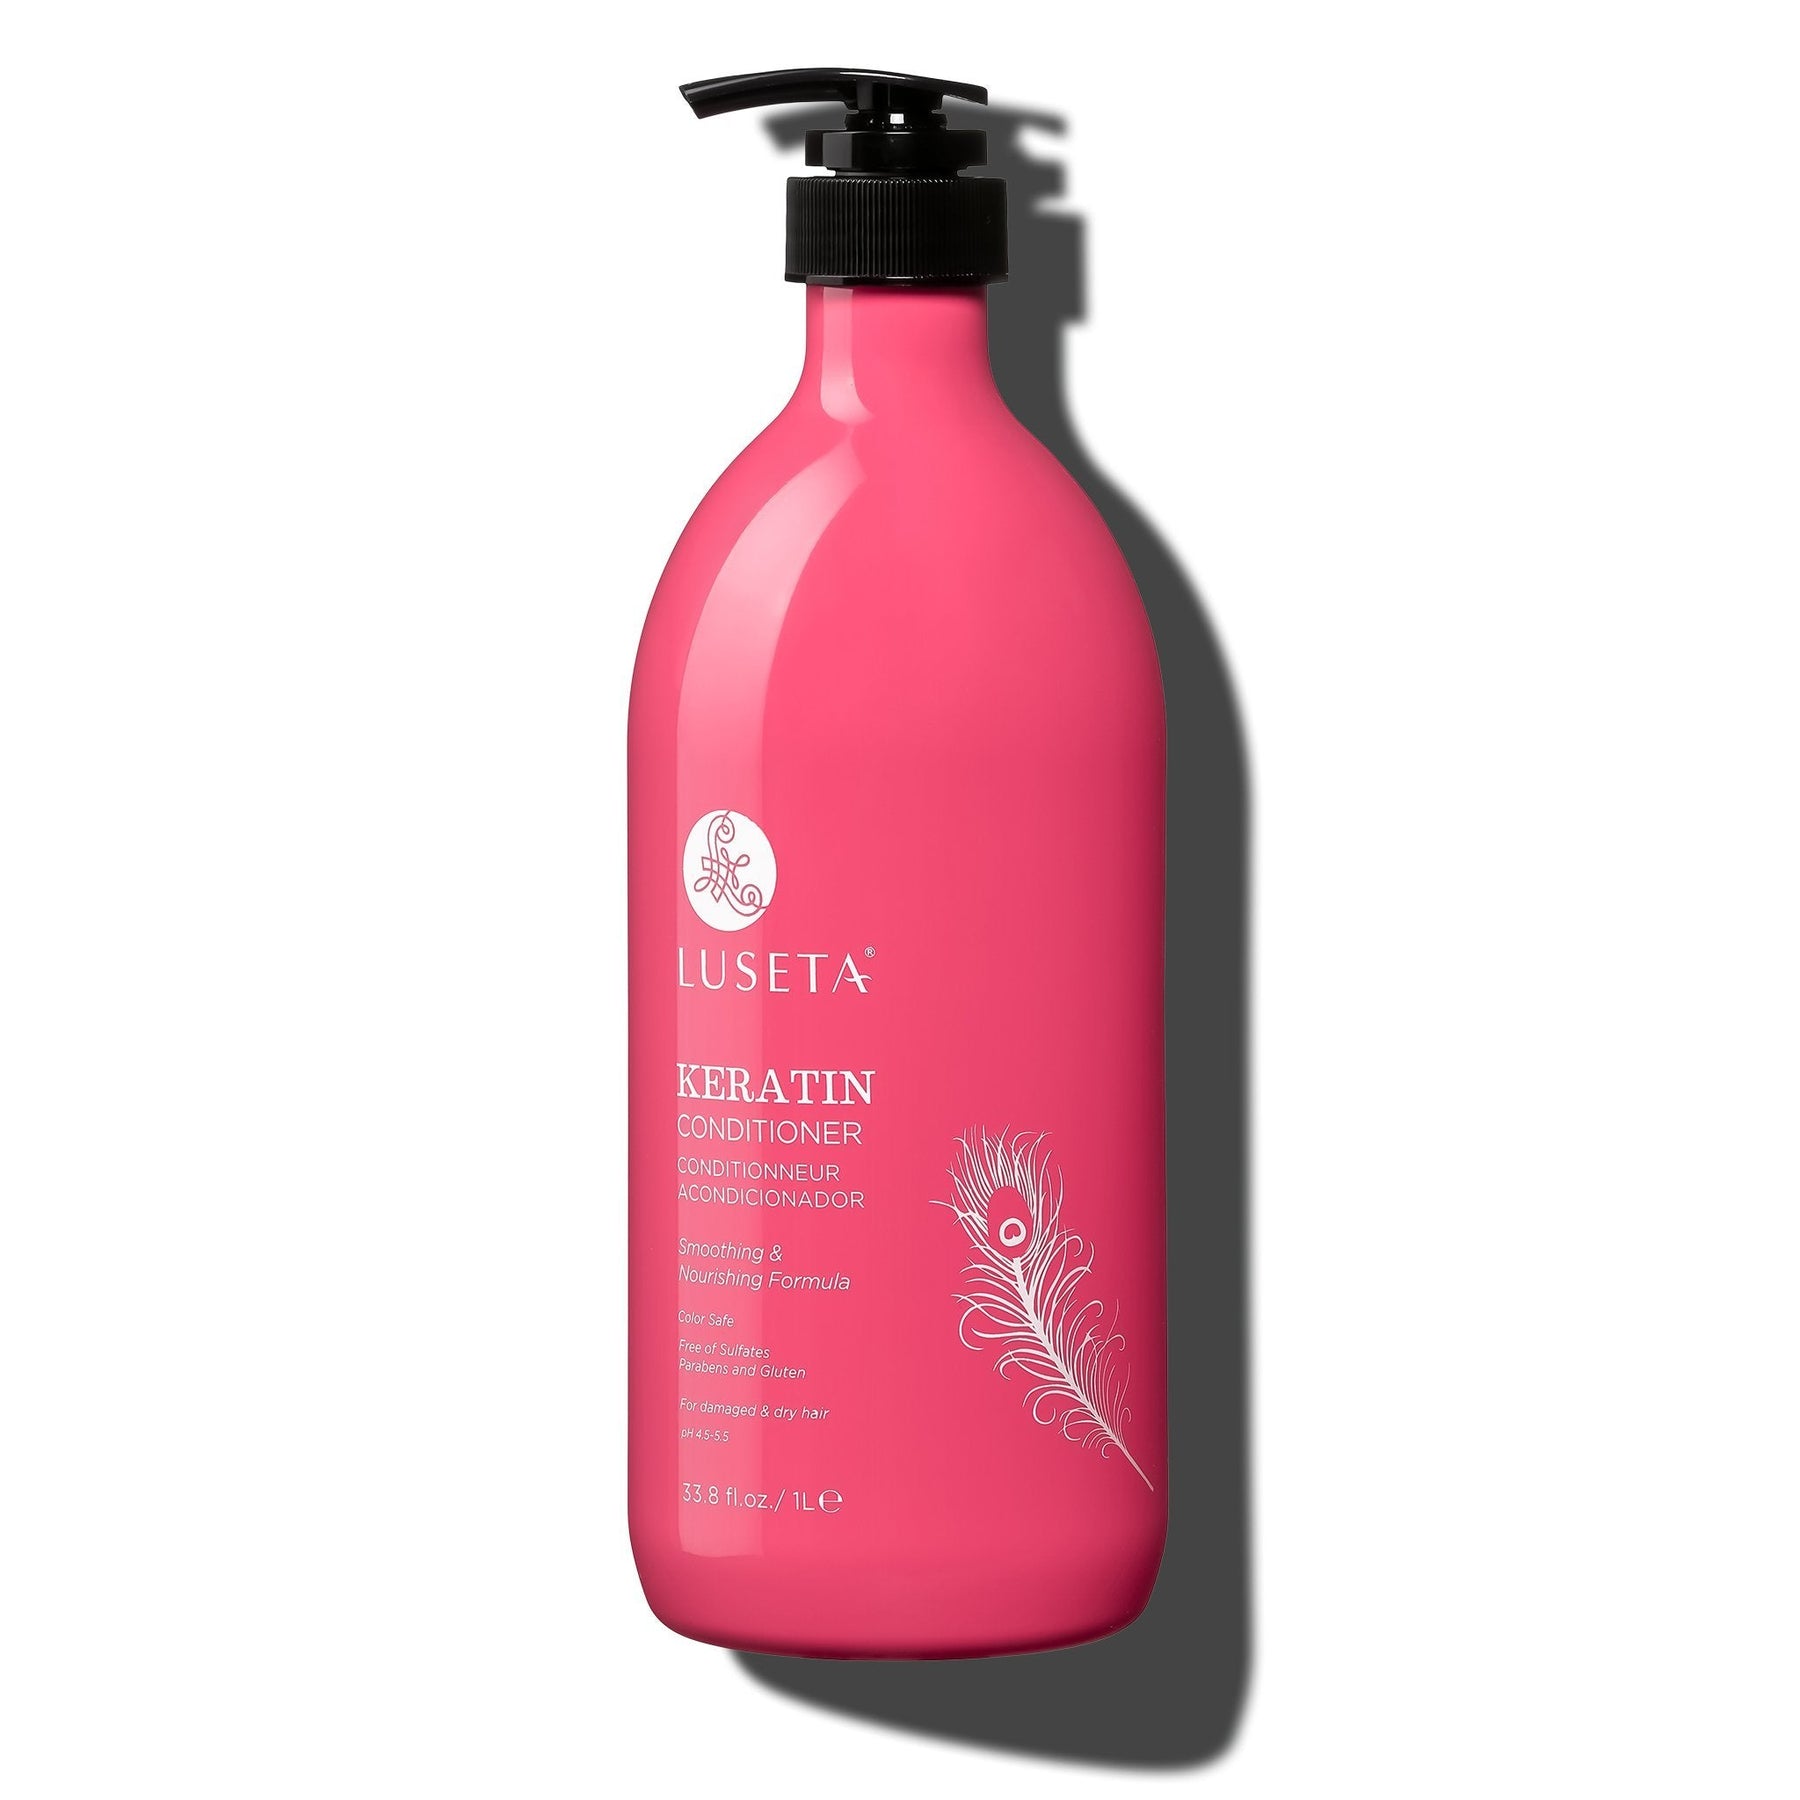 Keratin Conditioner - 33.8oz - by Luseta Beauty |ProCare Outlet|